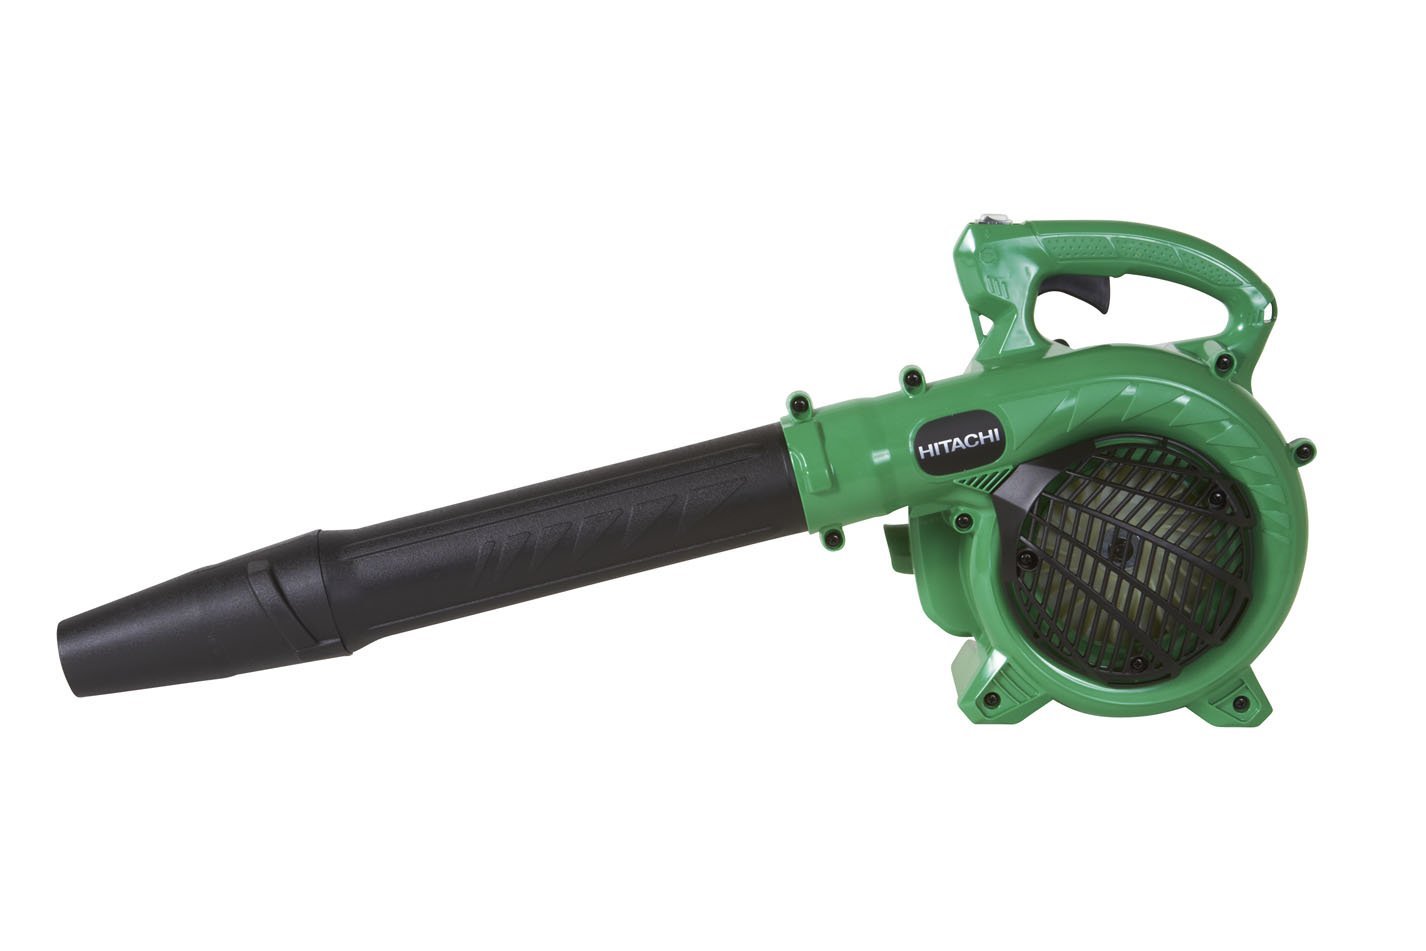 Today only: Hitachi 2-cycle gas powered 170 MPH handheld leaf blower for $89